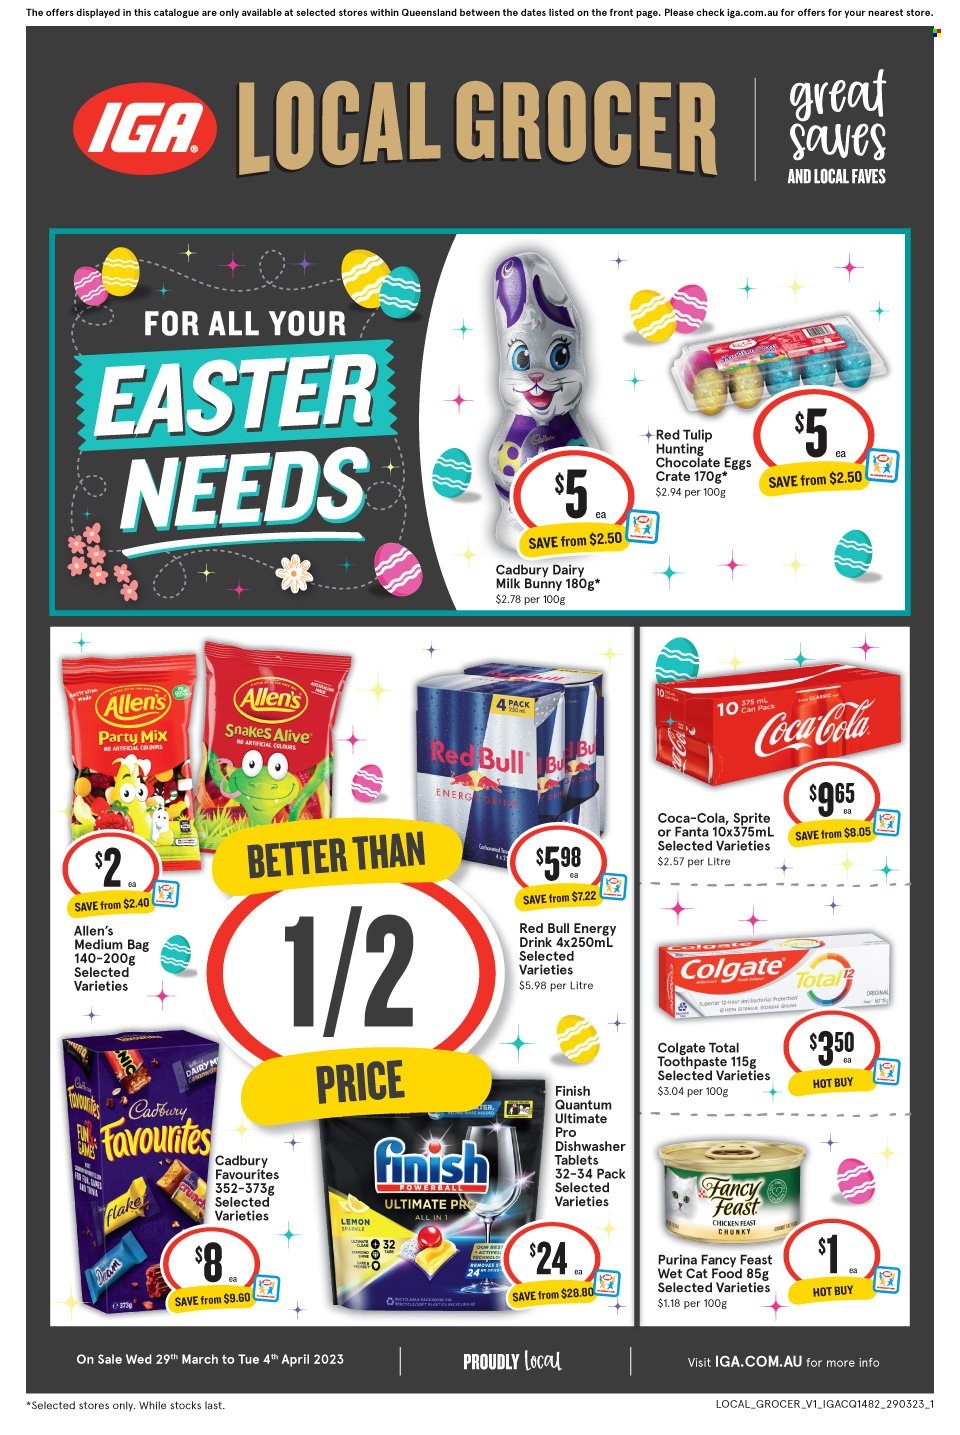 thumbnail - IGA Catalogue - 29 Mar 2023 - 4 Apr 2023 - Sales products - chocolate, Cadbury, Dairy Milk, chocolate egg, Coca-Cola, Sprite, energy drink, Fanta, Red Bull, dishwasher cleaner, Finish Powerball, Finish Quantum Ultimate, dishwasher tablets, Colgate, toothpaste, crate, animal food, cat food, Purina, Fancy Feast, wet cat food. Page 1.